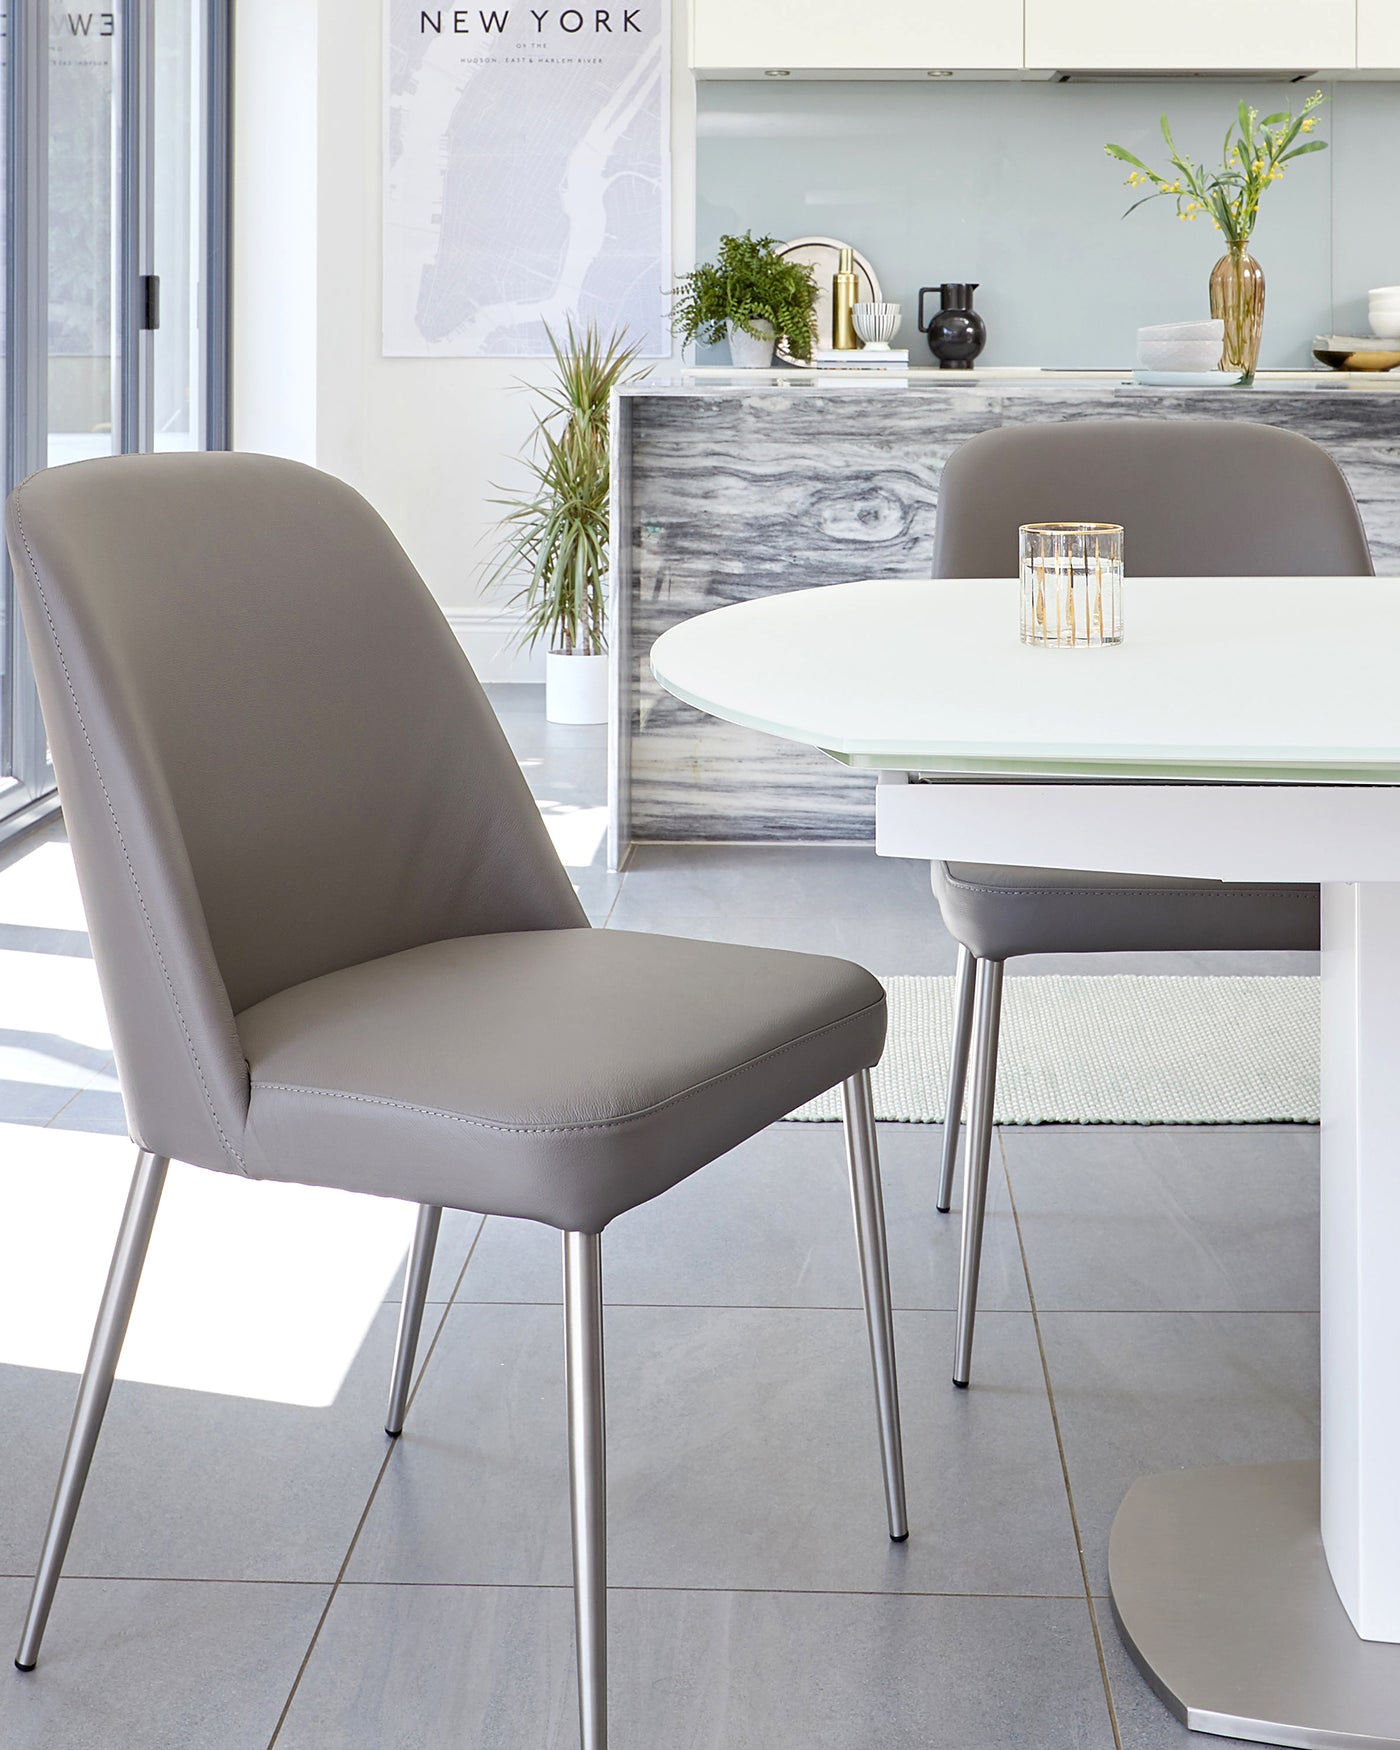 Modern minimalist dining furniture featuring a white oval tabletop with a unique pedestal base, paired with sleek taupe upholstered dining chairs with visible stitch detailing and metallic legs, set in a bright contemporary kitchen setting.